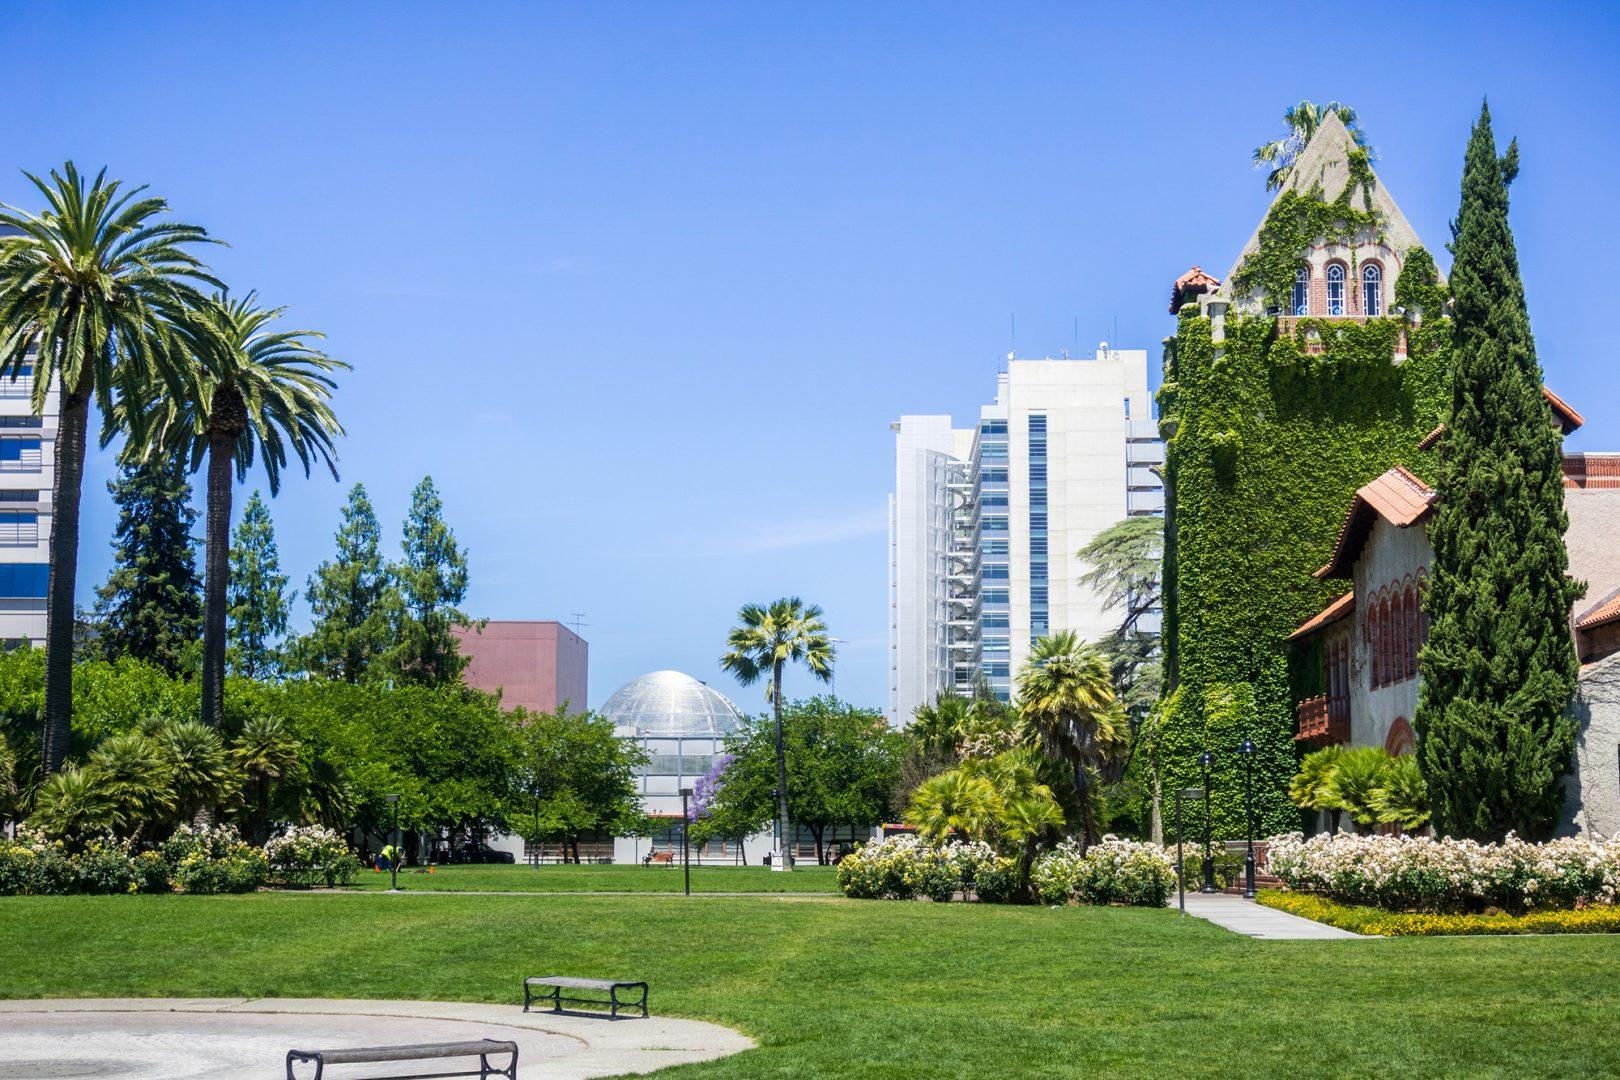 An old, ivy-covered building at San Jose State University, right, stands next to the modern City Hall building in San Jose, California. (Dreamstime/TNS)